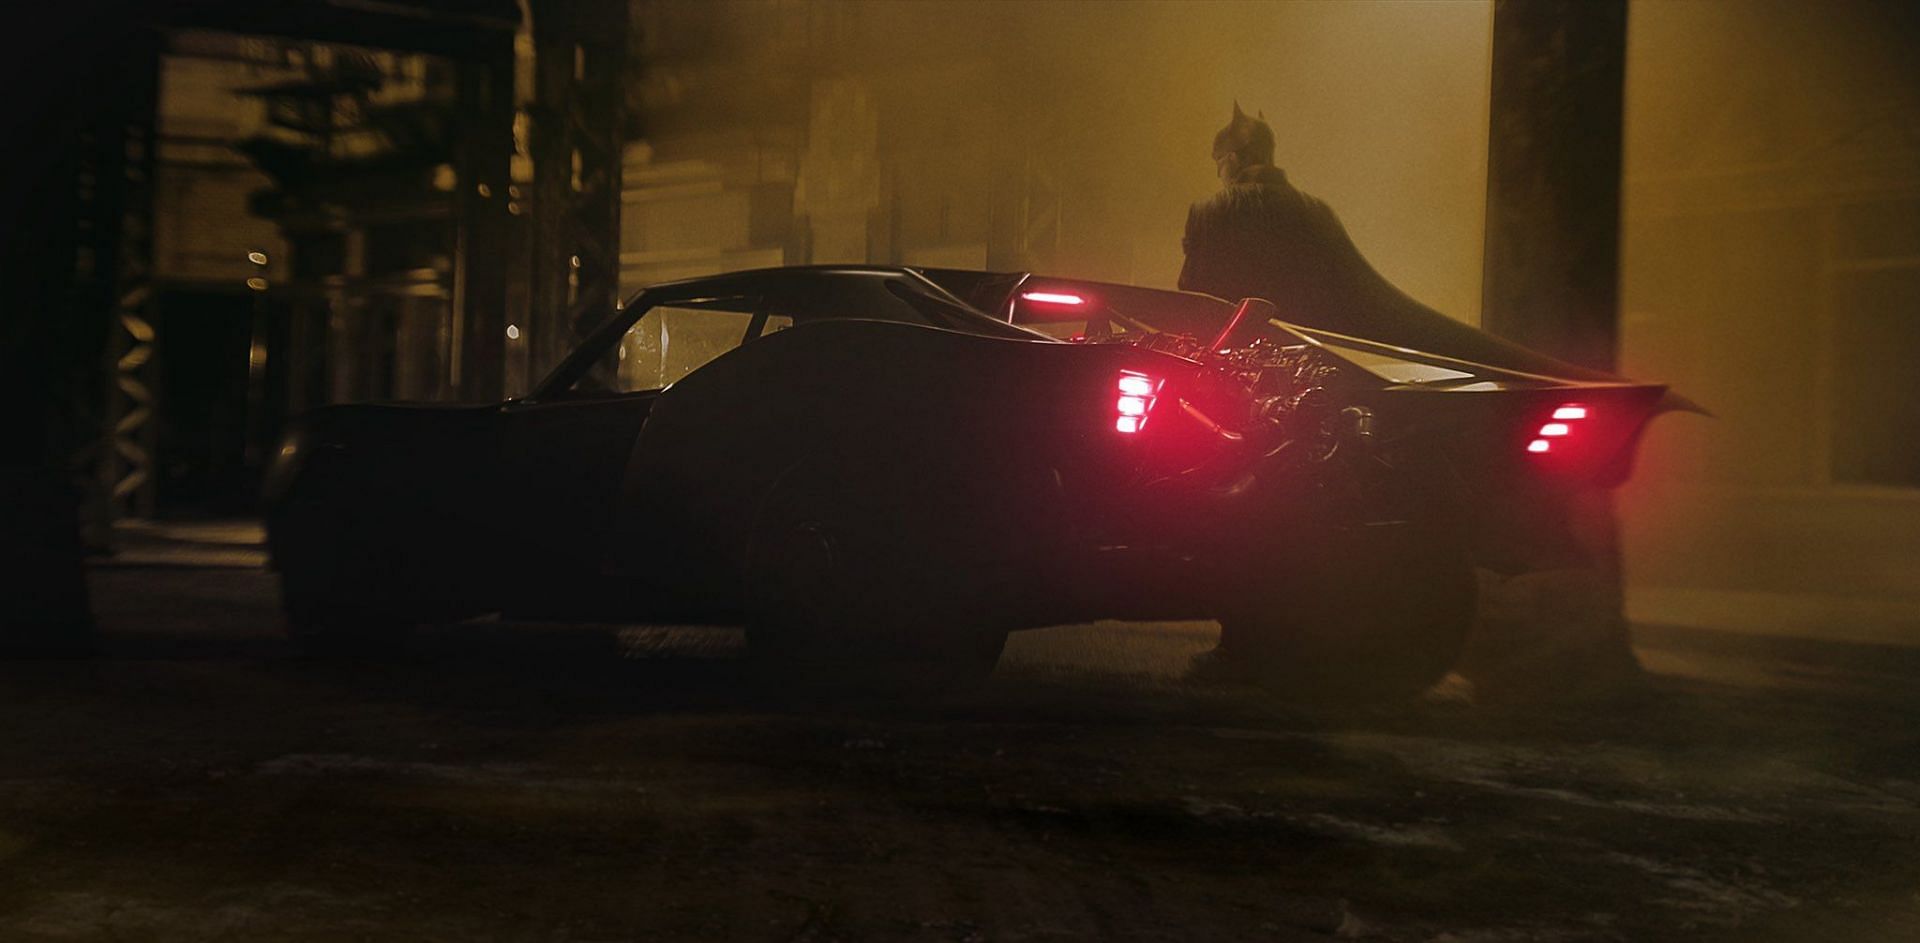 Batmobile, DC Extended Universe Wiki